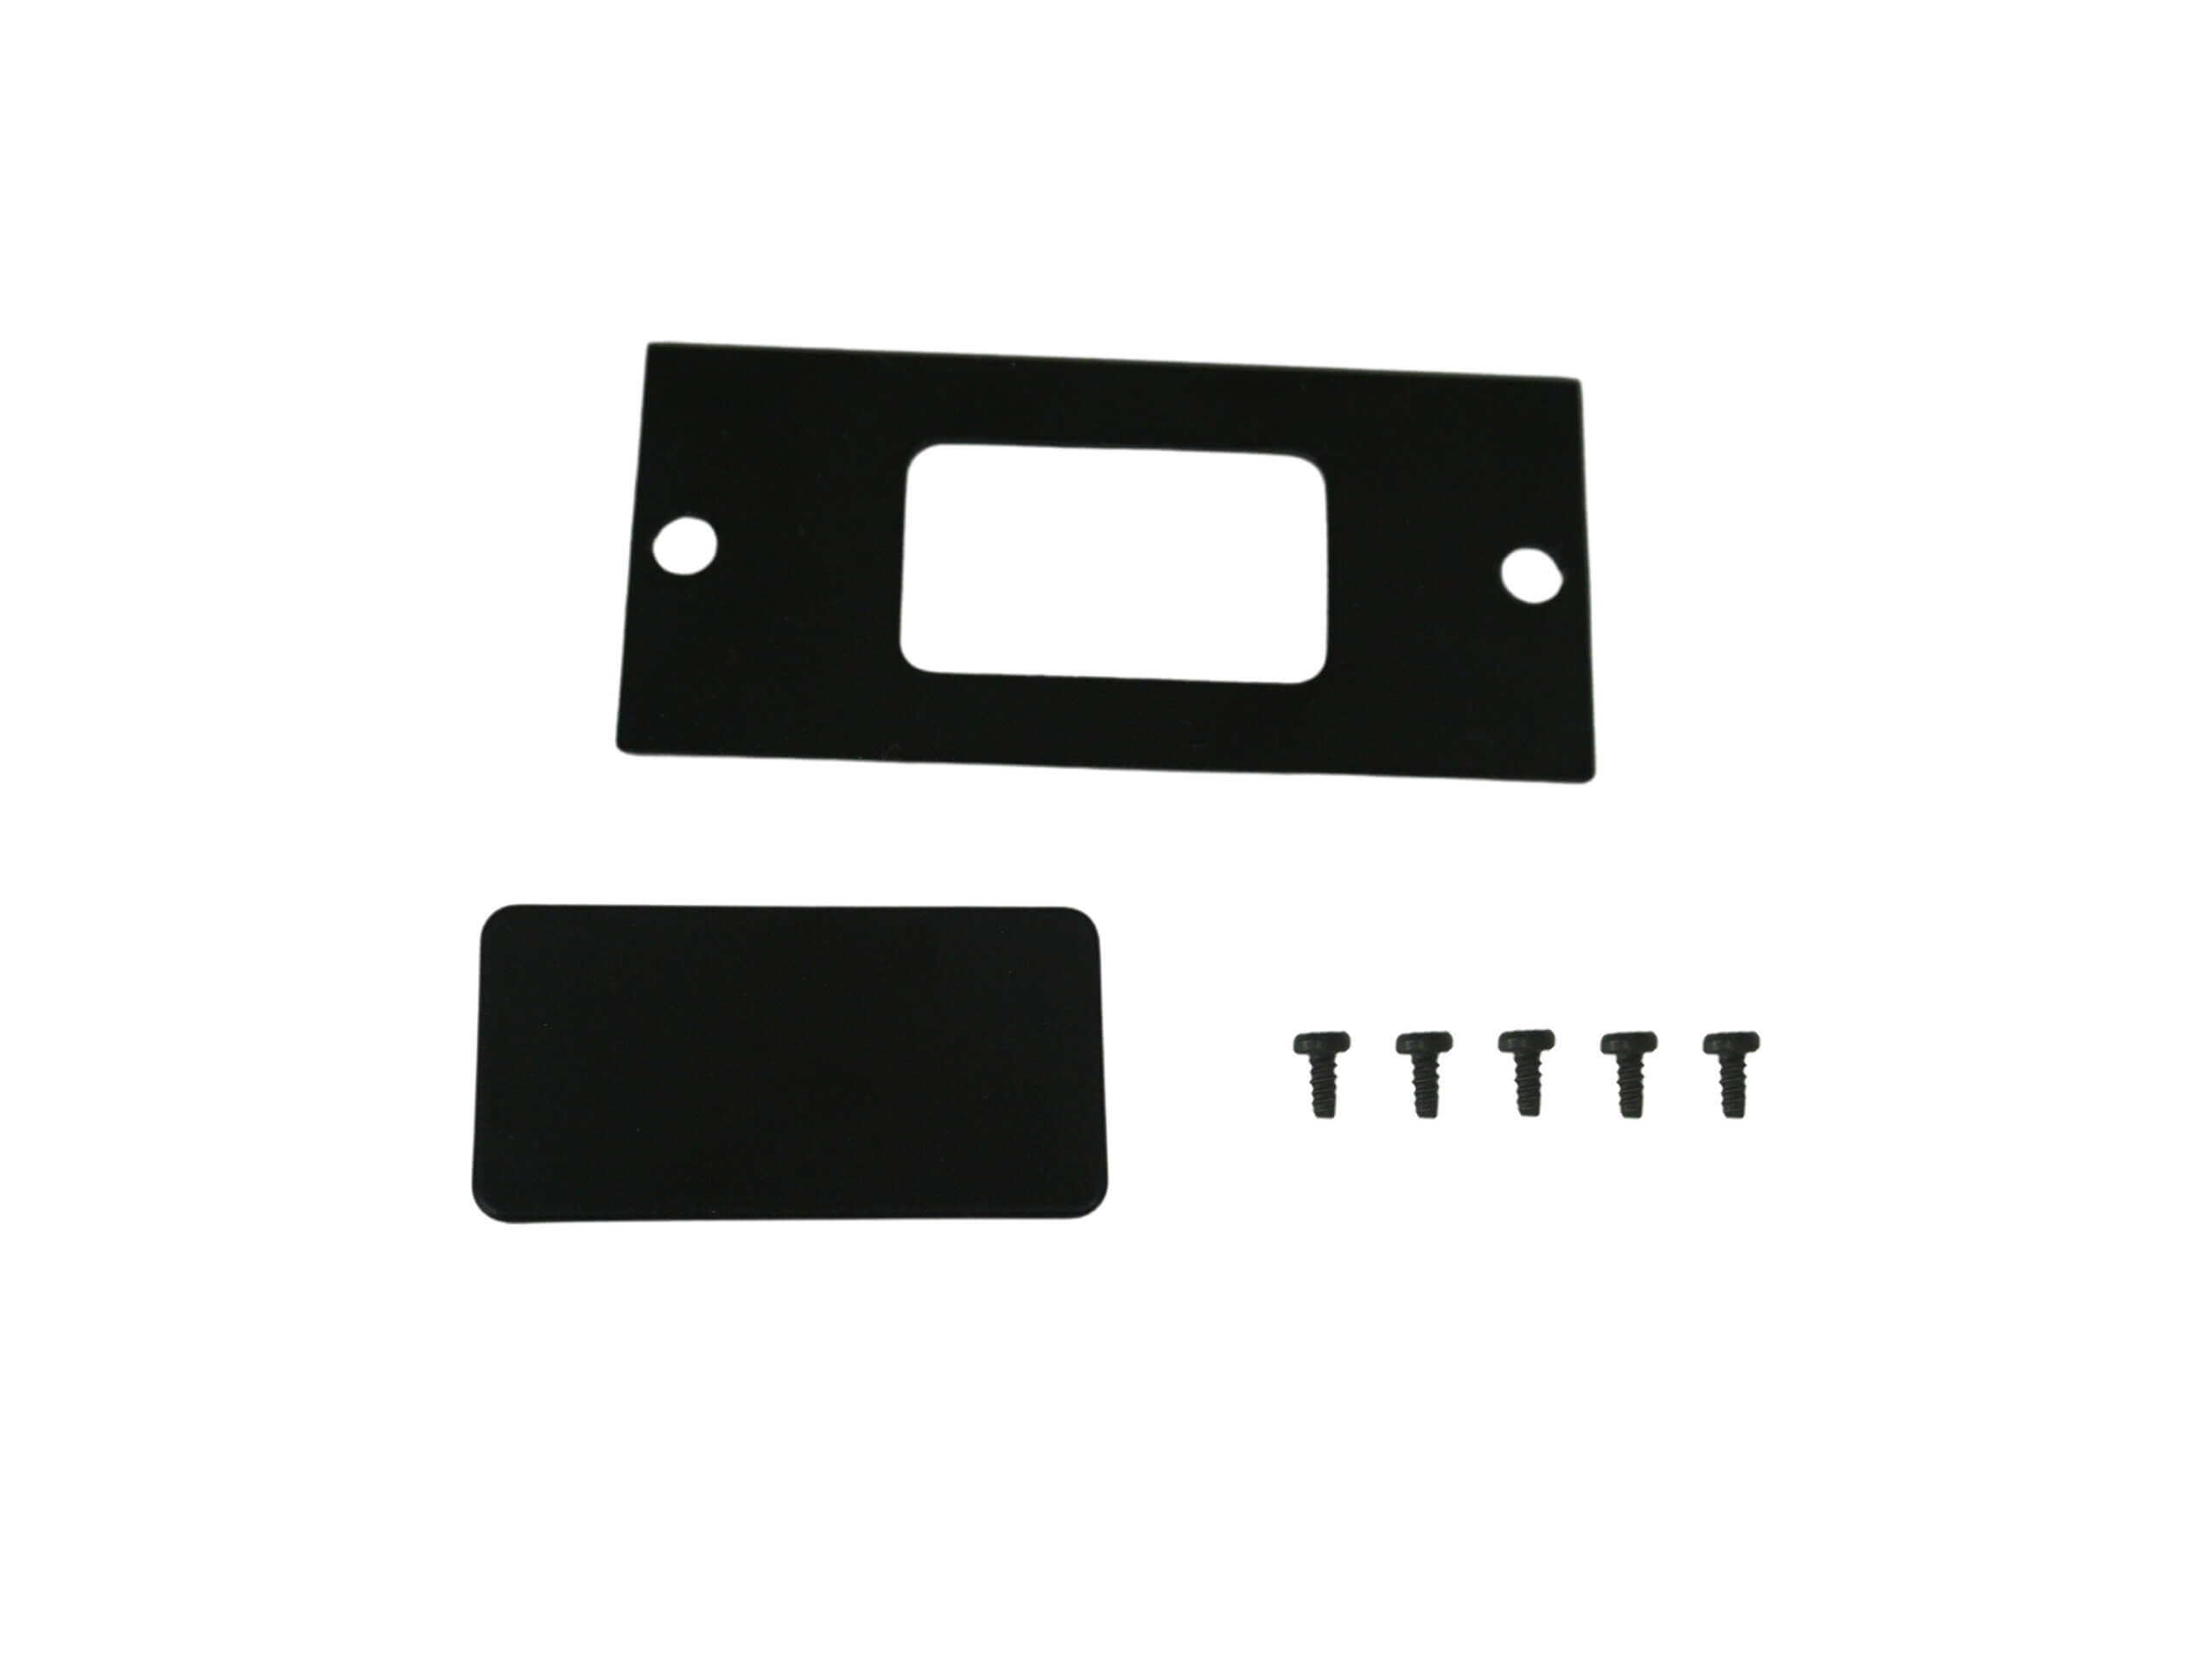 Console Accessory Bracket with 1 Blank for Rectangular Accessories for 3.3″ Section of VSW Consoles